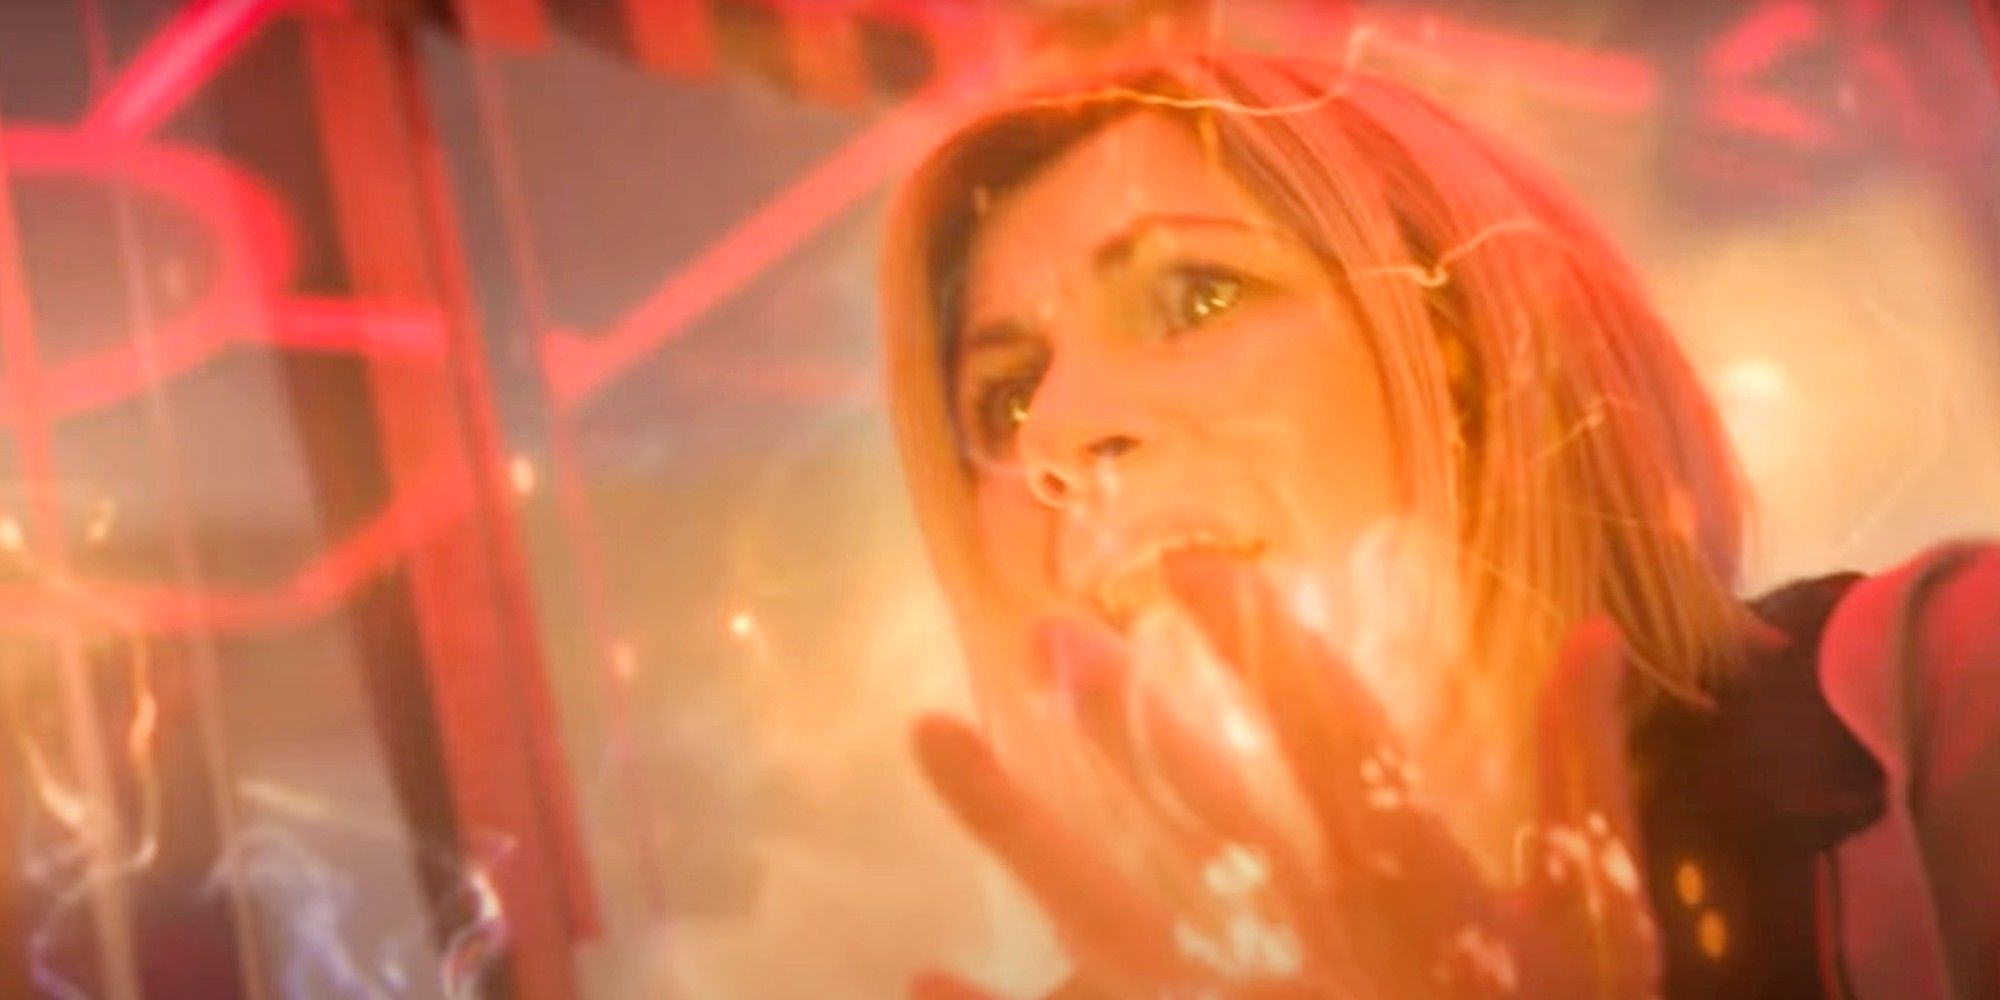 Doctor Who The Power of the Doctor Next Time Teaser Jodie Whittaker as The Thirteenth Doctor